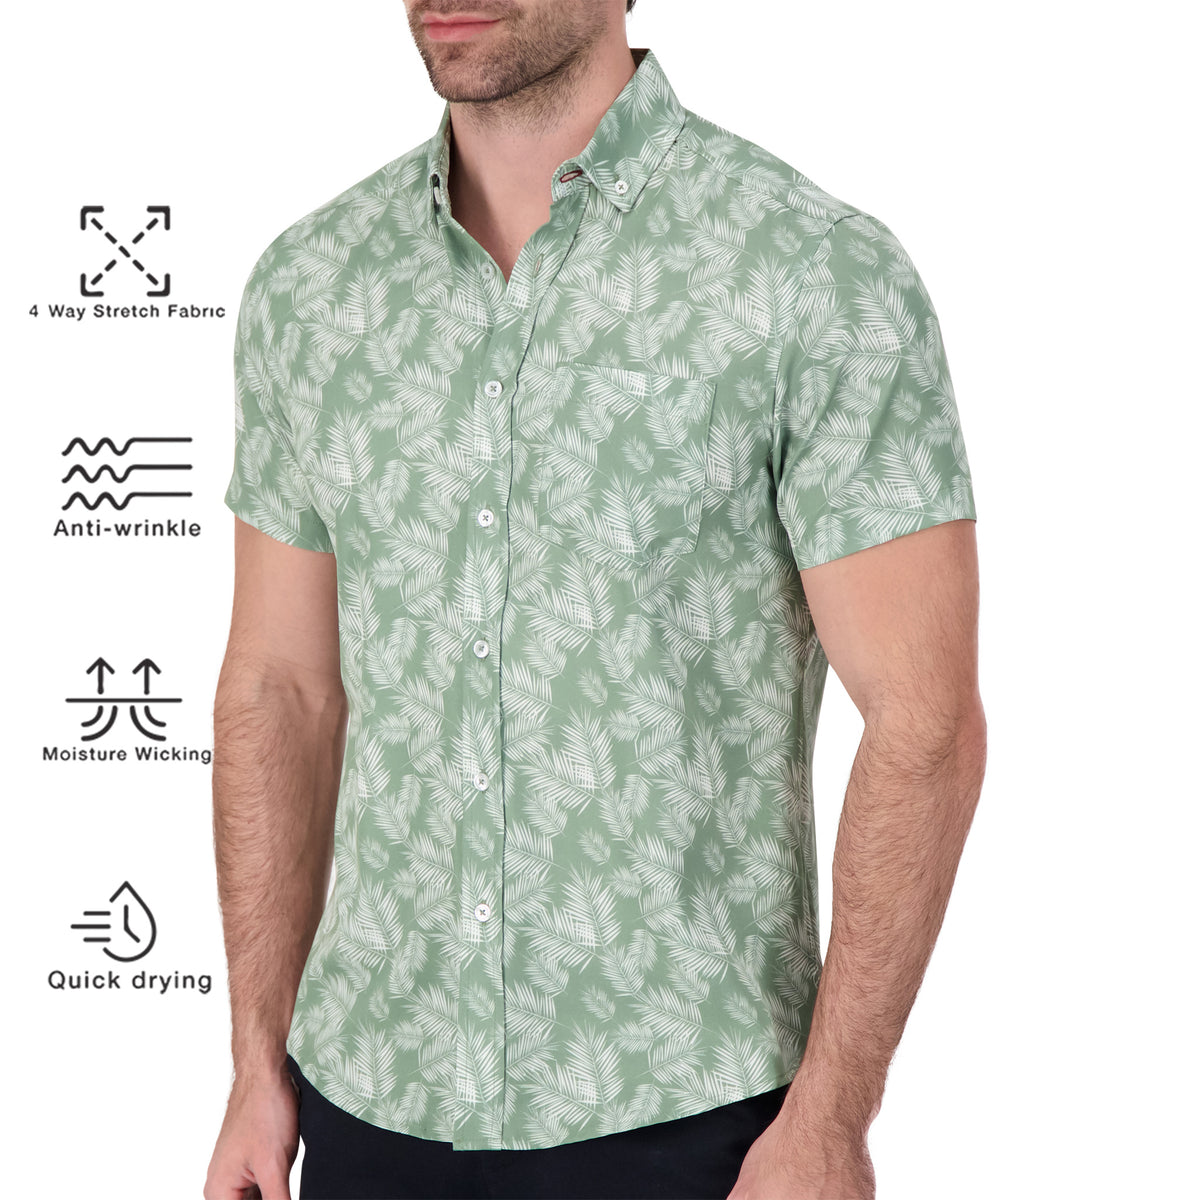 Model Side View of Short Sleeve 4-Way Stretch Shirt with Leaf Print in Green  with description of material being 4 way stretch fabric, anti-wrinkle, moisture wicking and quick drying